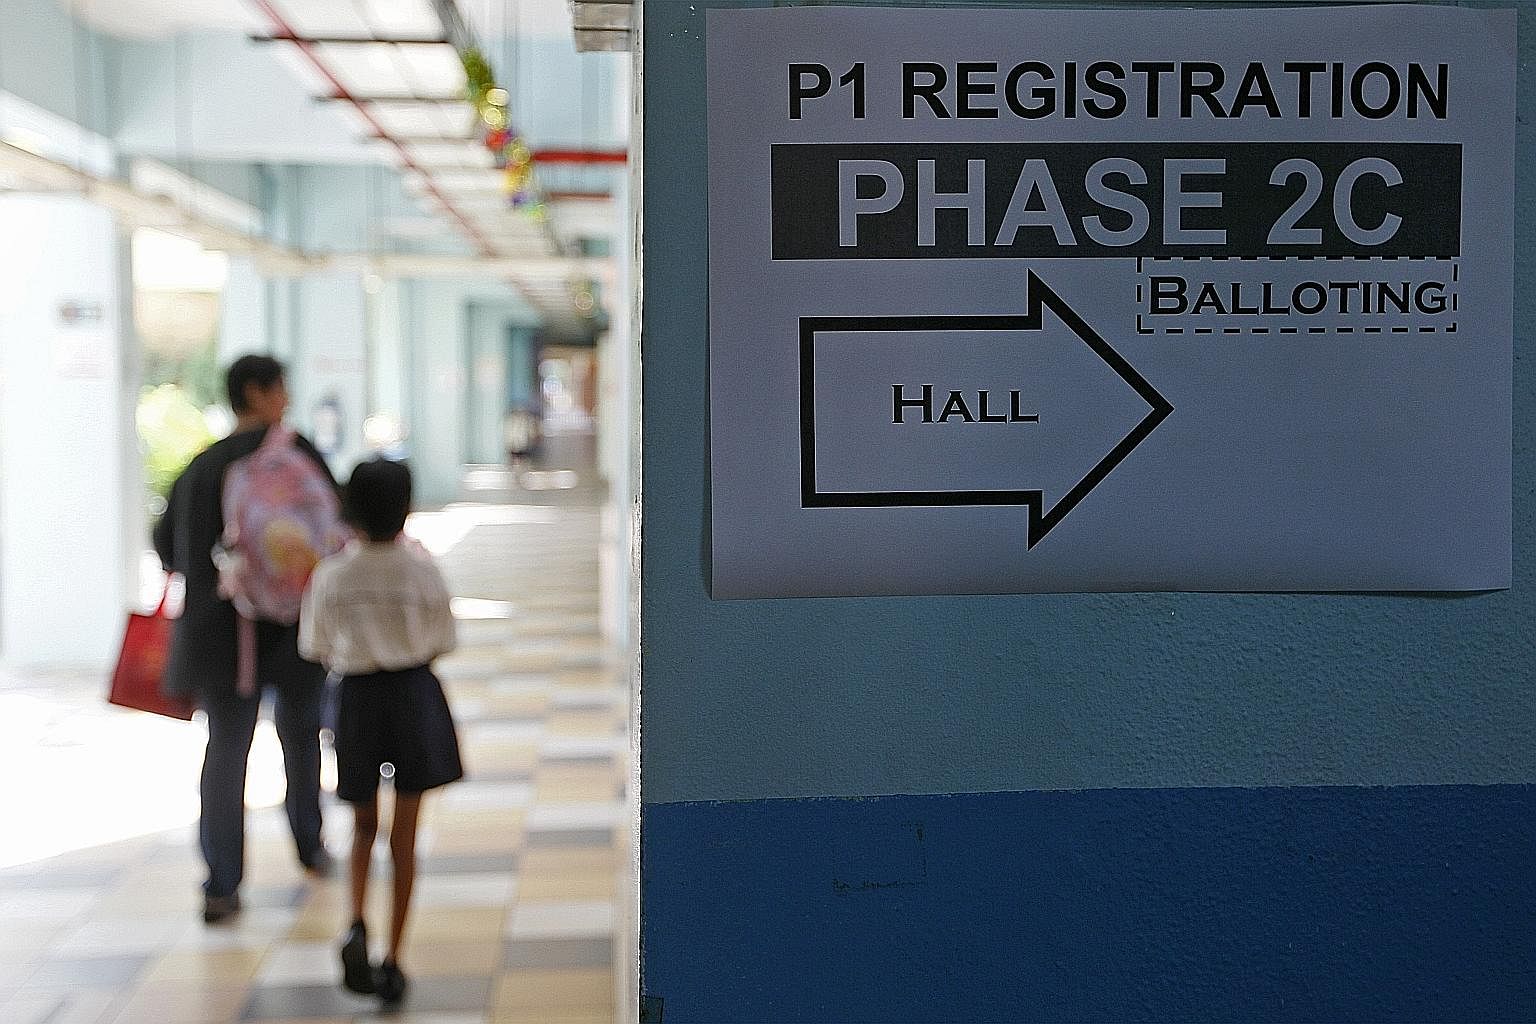 For Primary 1 registration, schools conduct a ballot when the number of applicants exceeds available places. Those who live nearer the school get priority in the ballot. Phase 2C is for those with no links to the school.